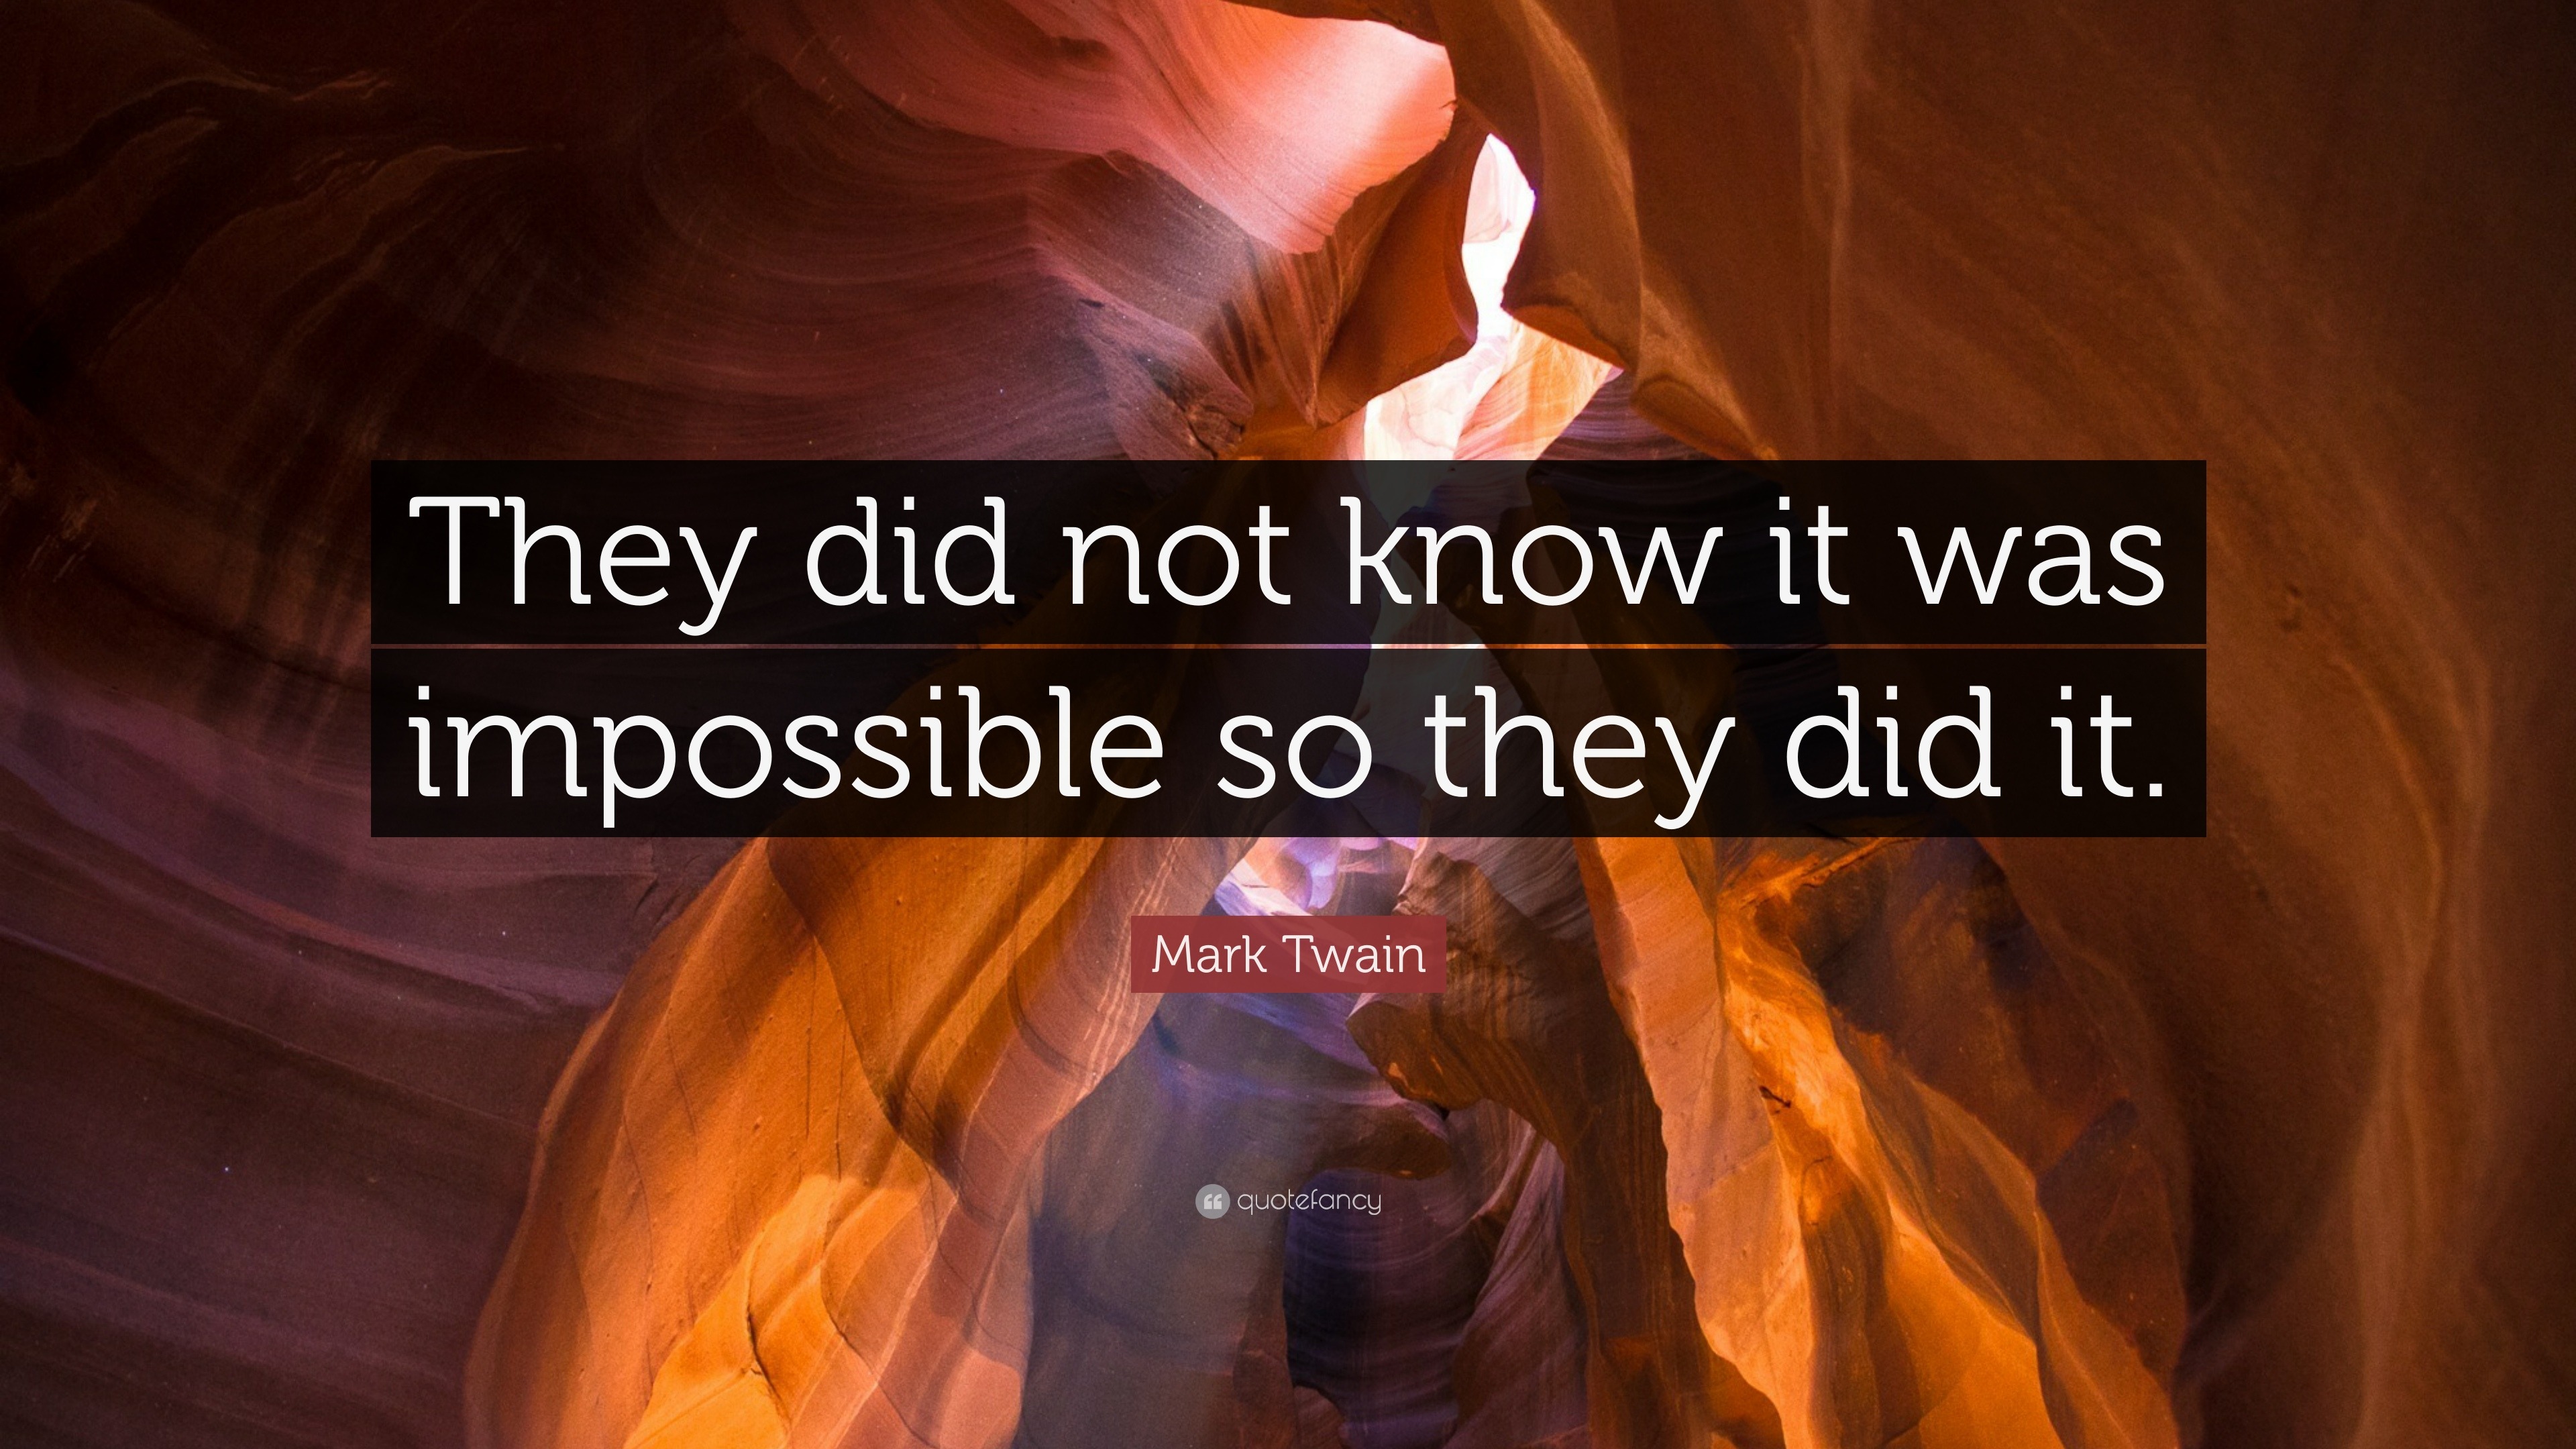 Mark Twain Quote: “They did not know it was impossible so they did it.”